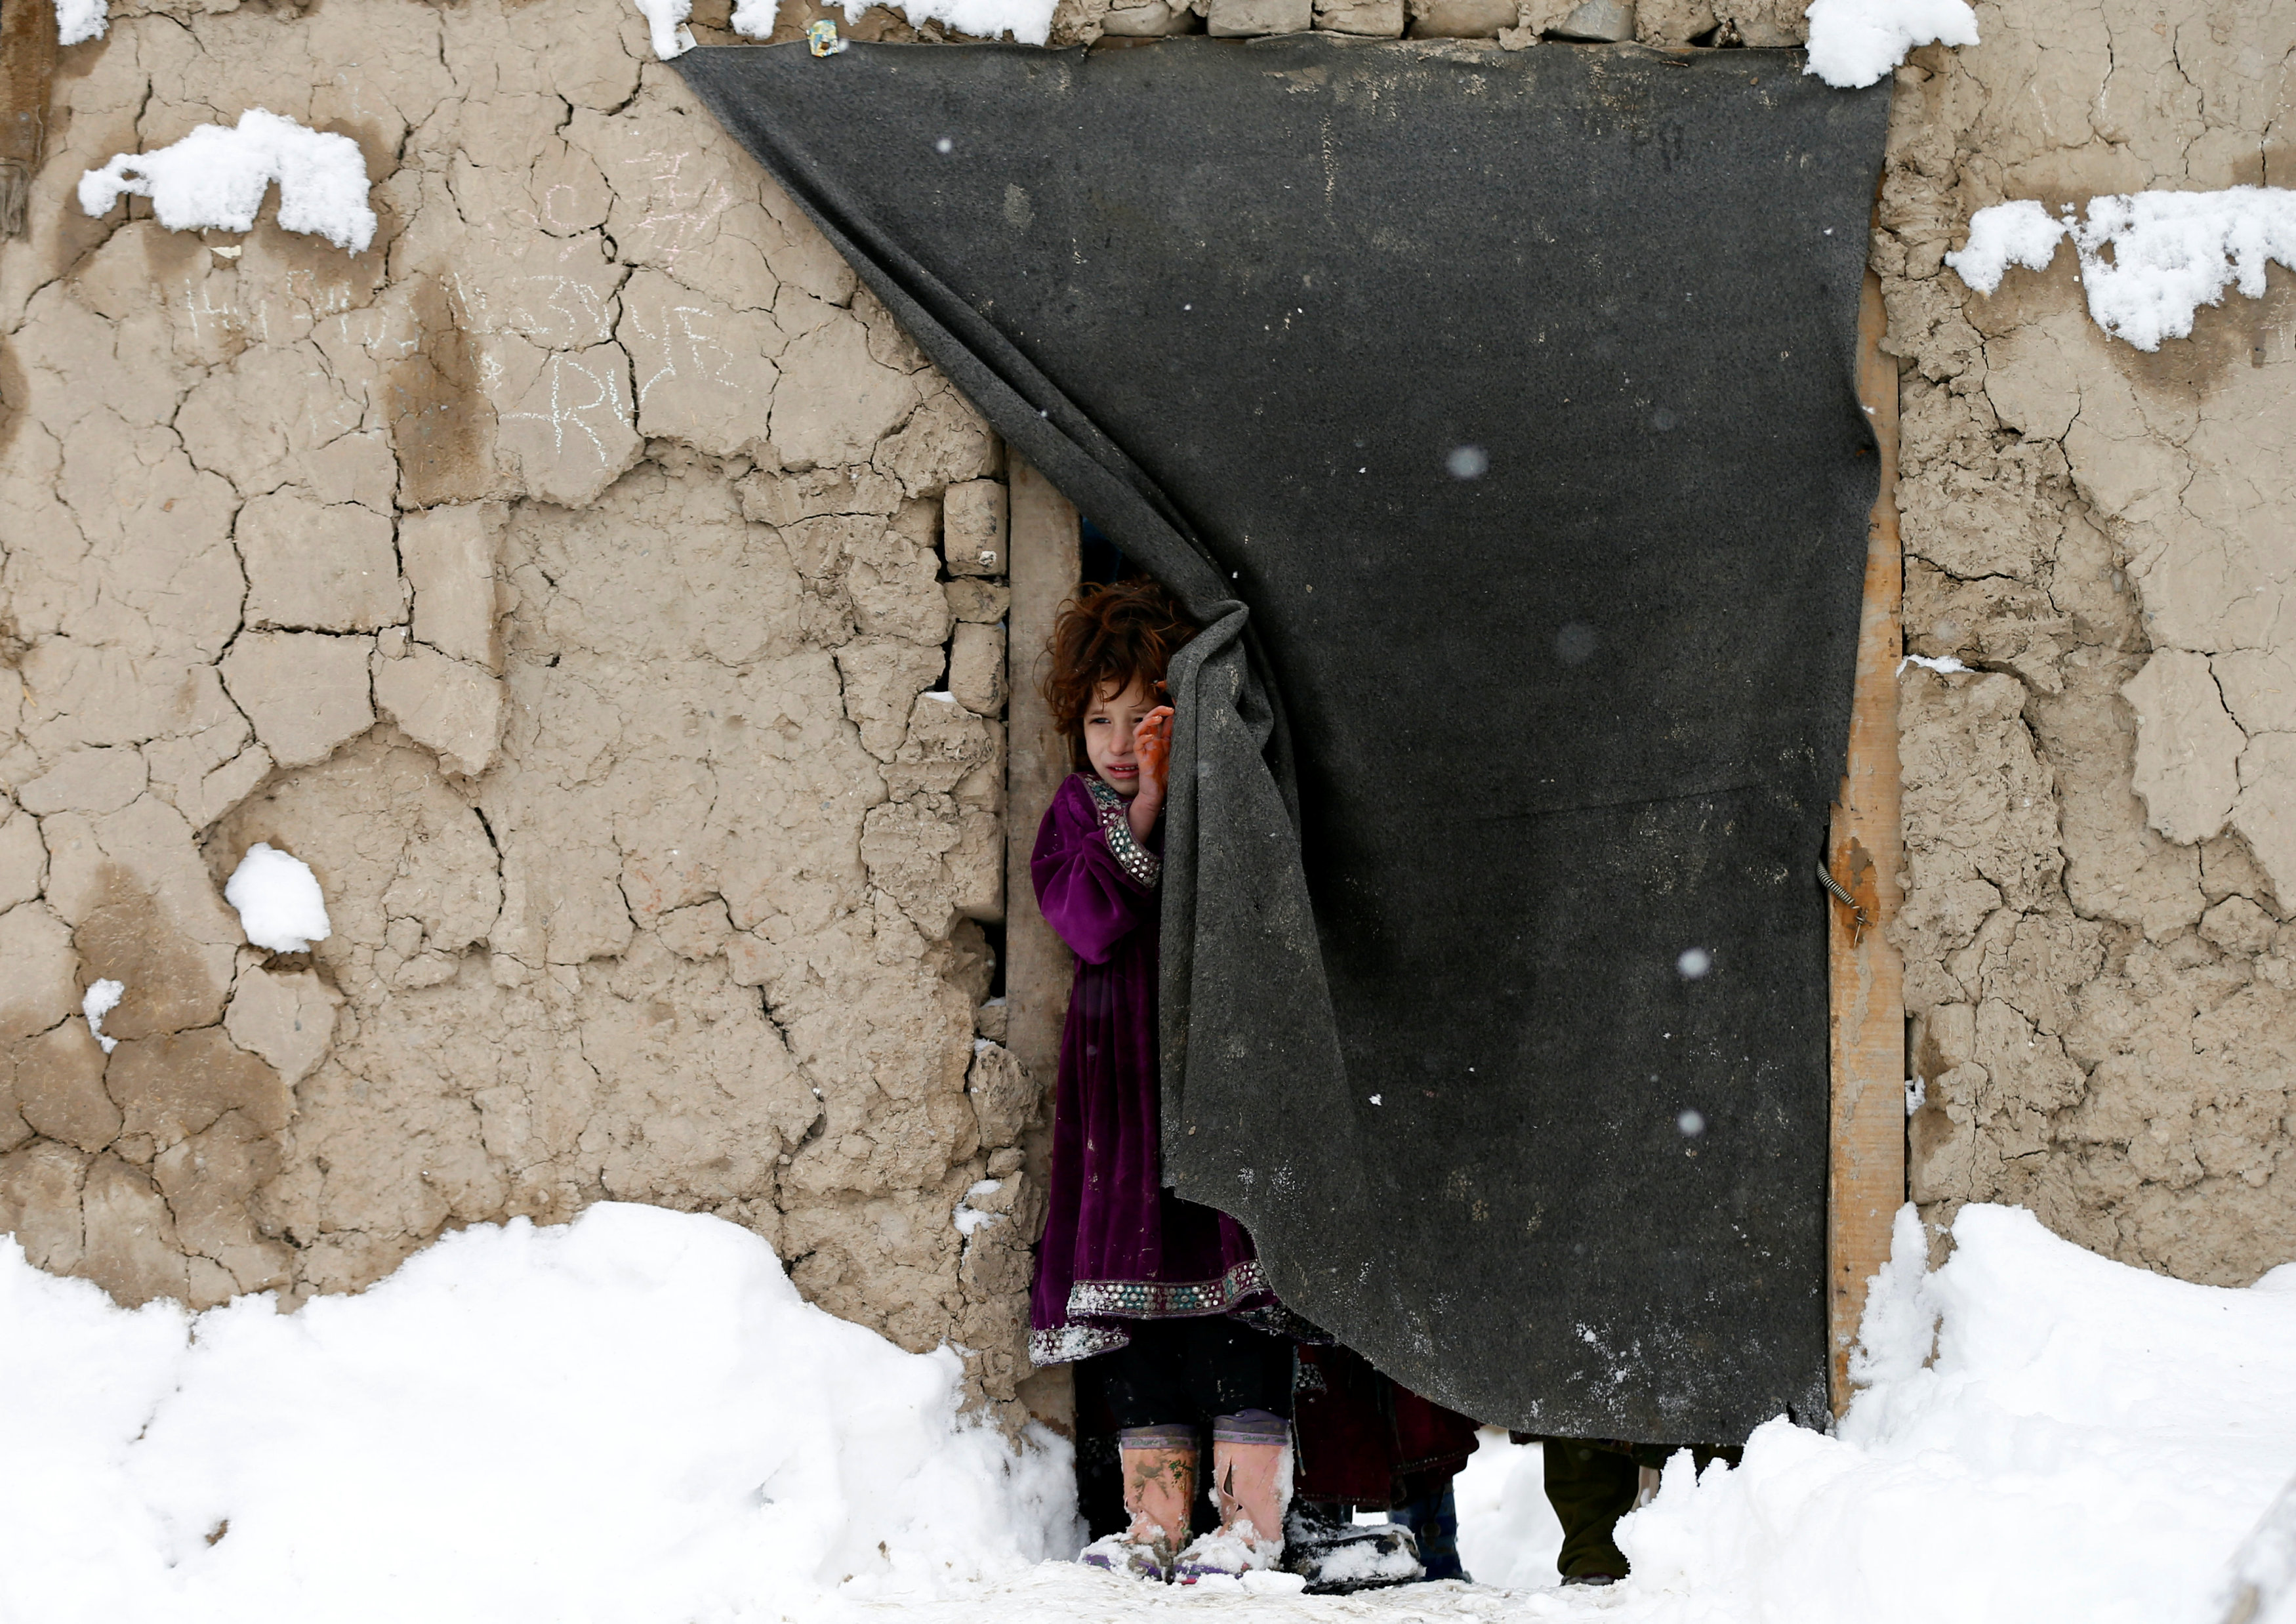 An internally displaced Afghan girl stands at the door of her shelter during a snowfall in Kabul, Afghanistan February 5, 2017. REUTERS/Mohammad Ismail